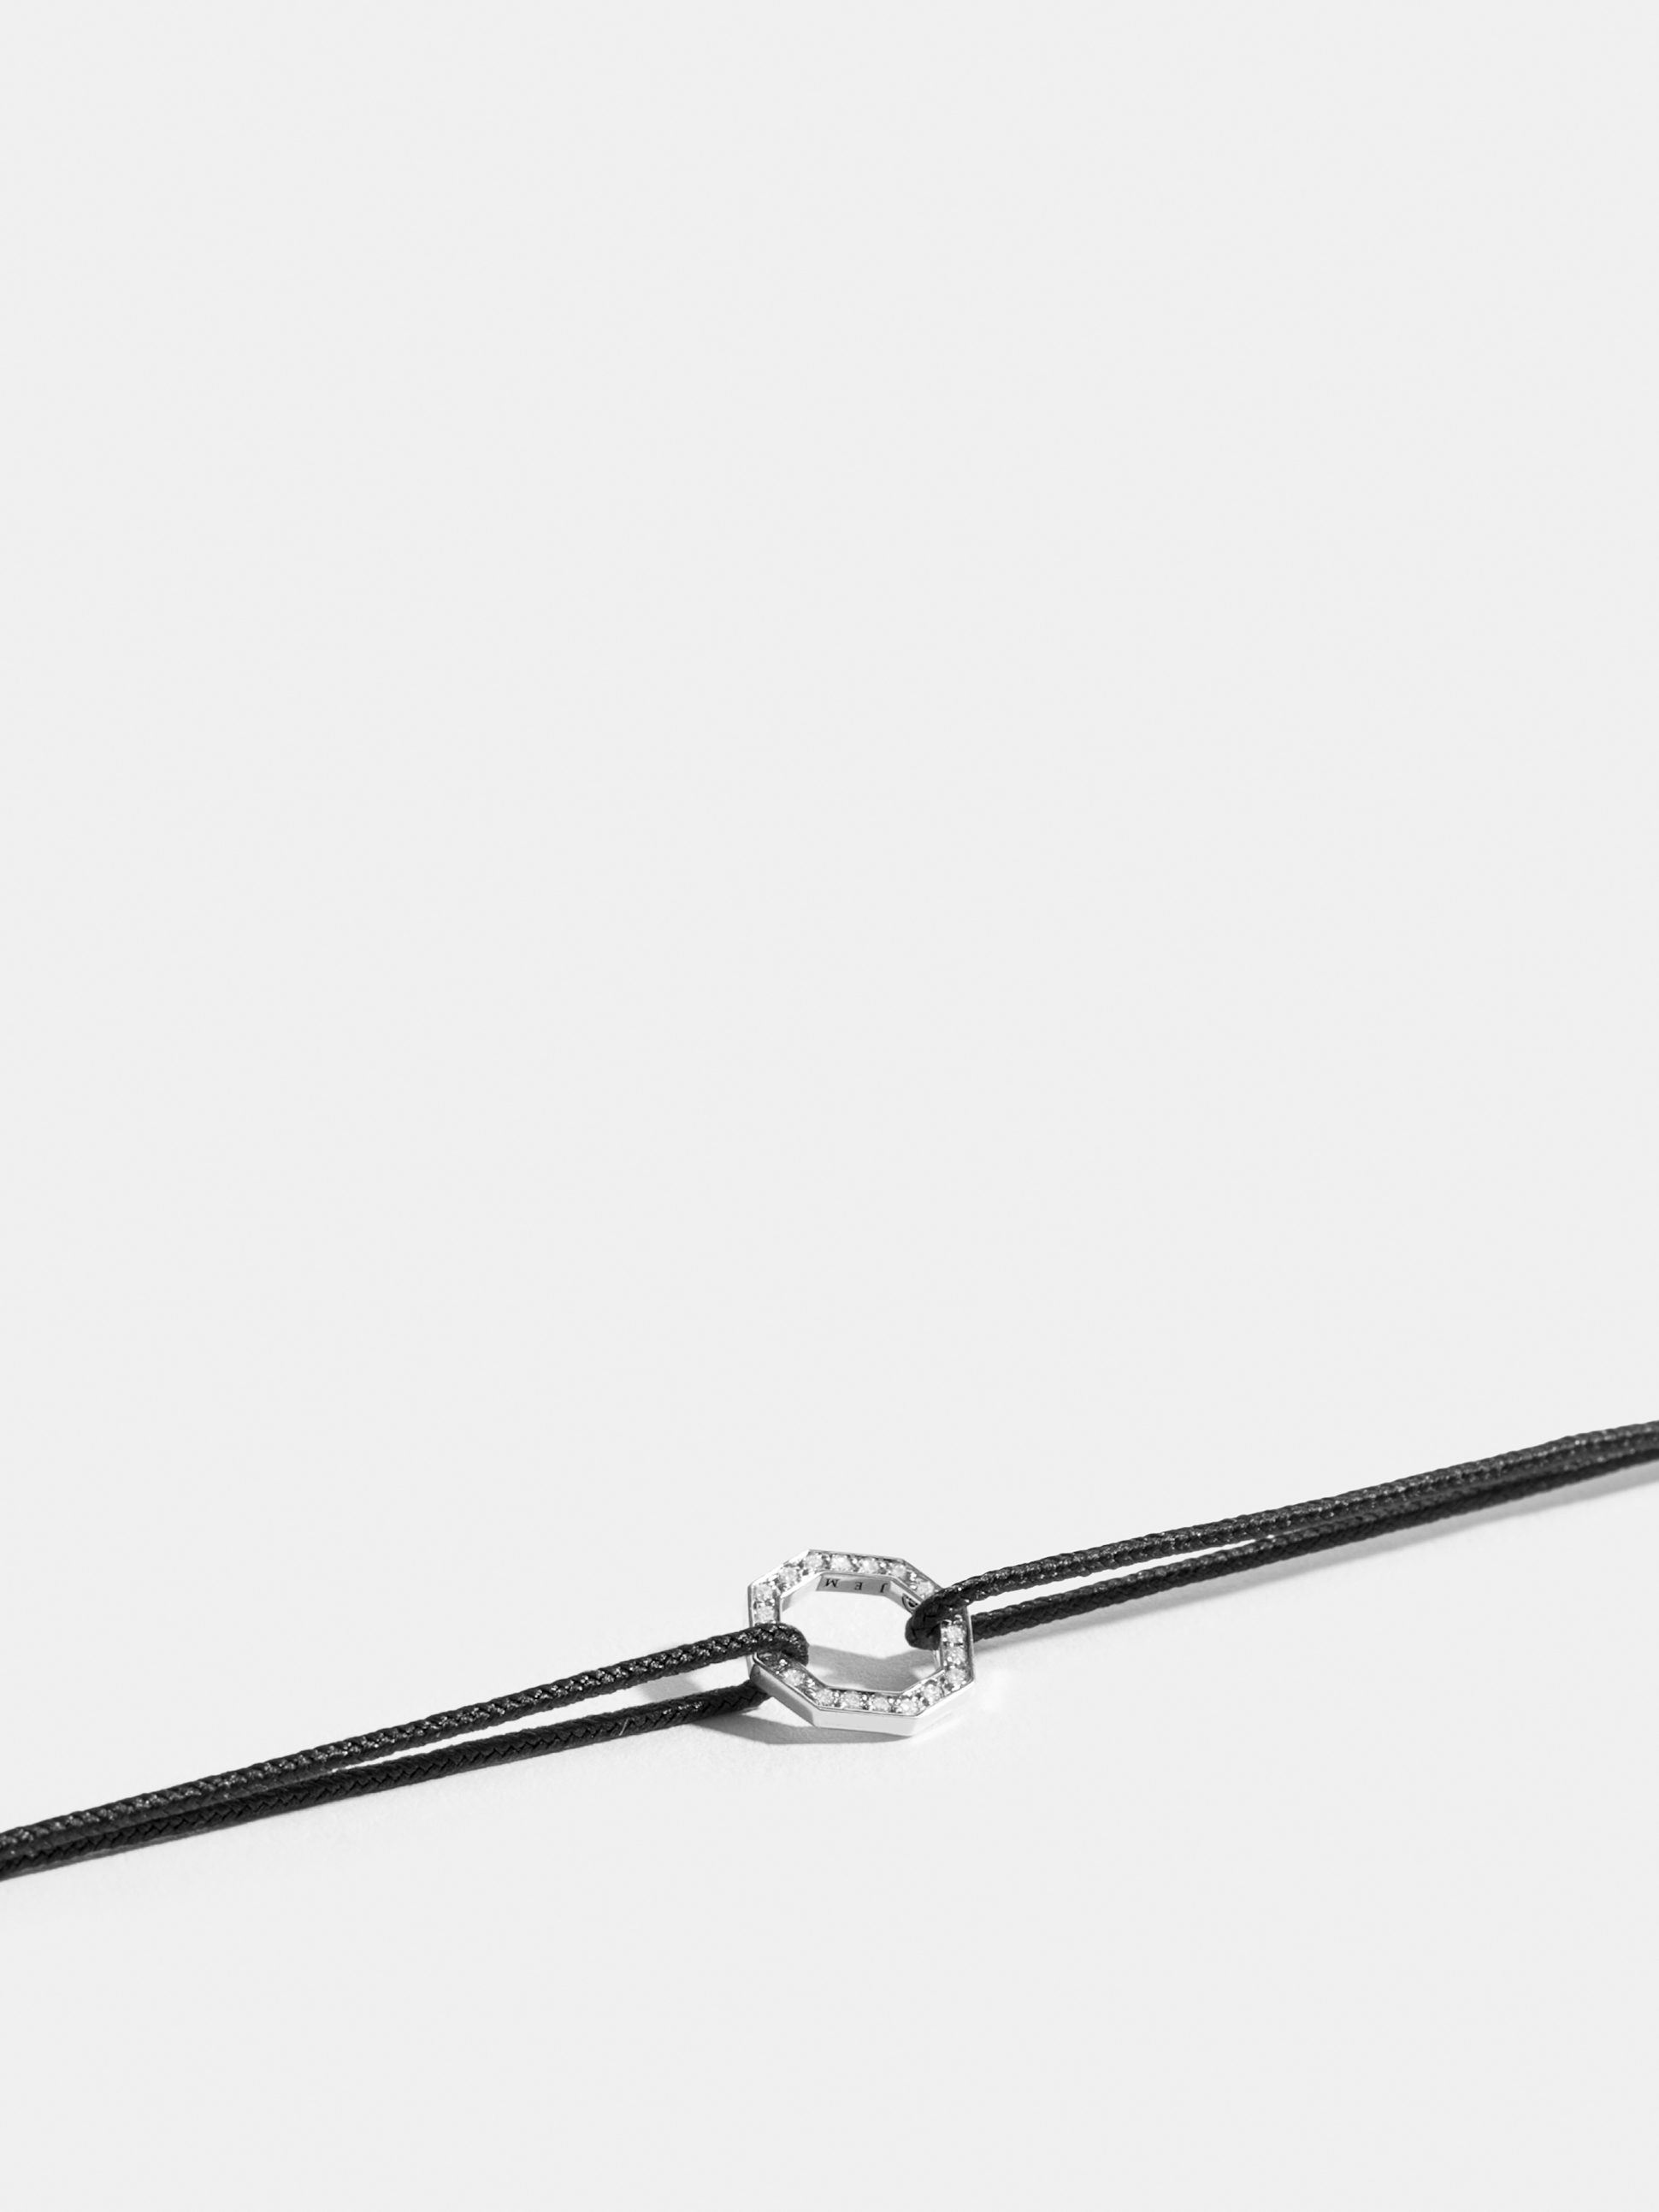 Octogone motif in 18k Fairmined ethical white gold, paved with lab-grown diamonds, on a black cord.